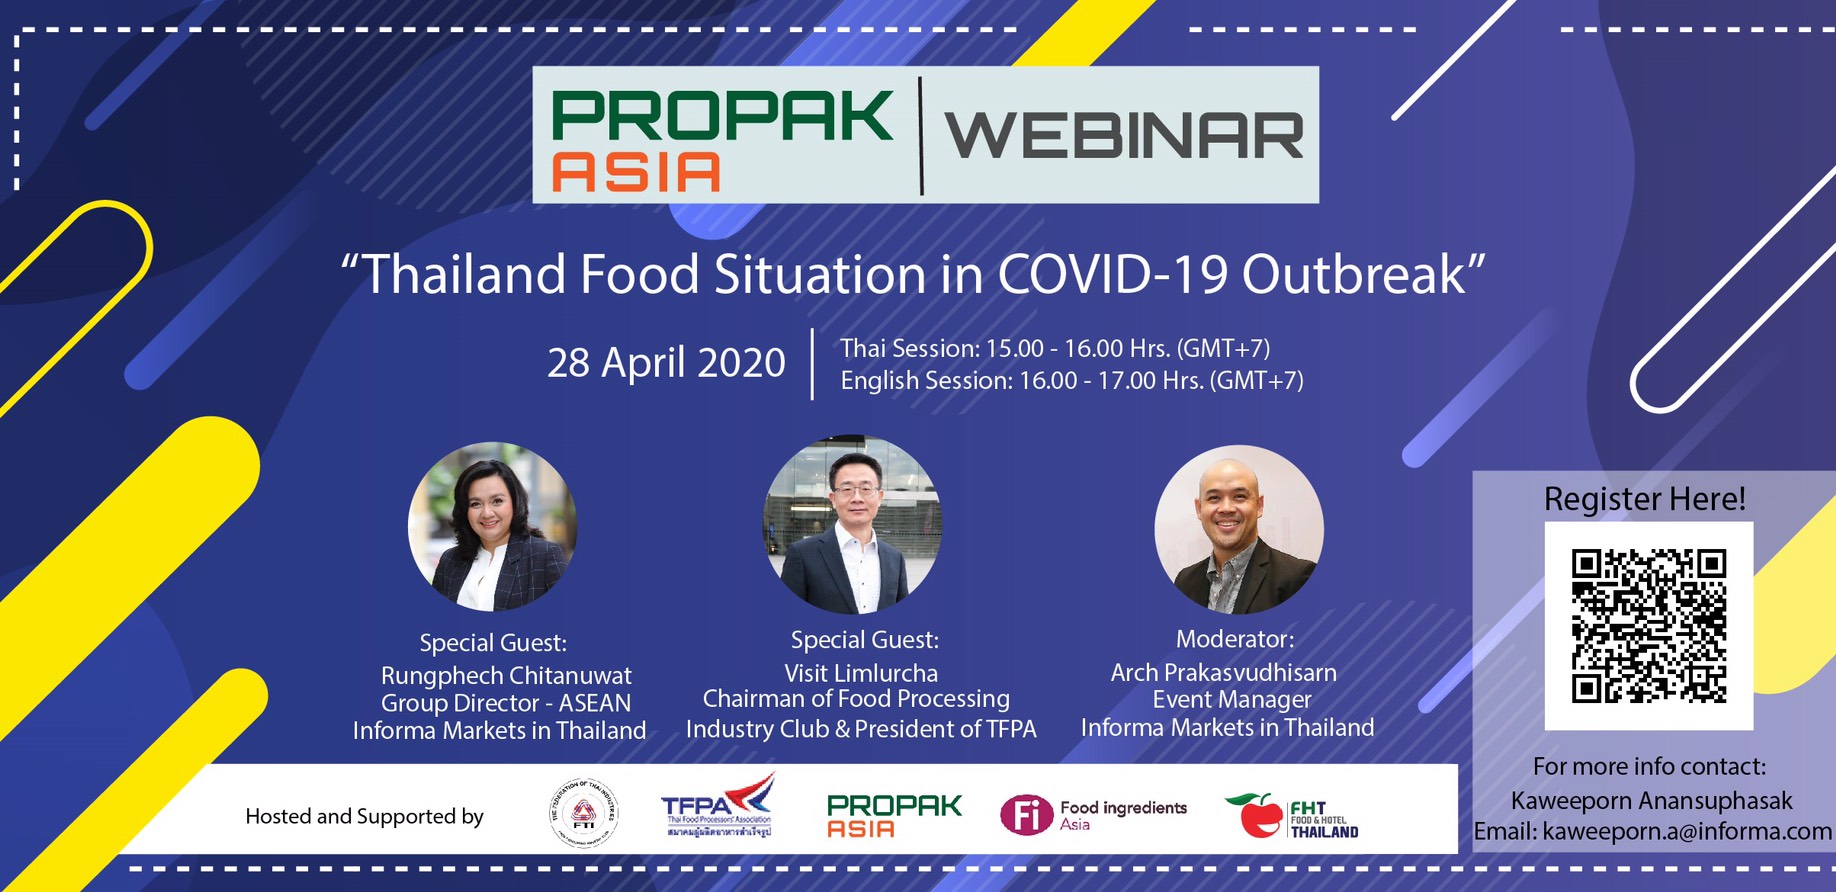 ProPak Asia 2020 Webinar Thailand food situation in COVID-19 outbreak